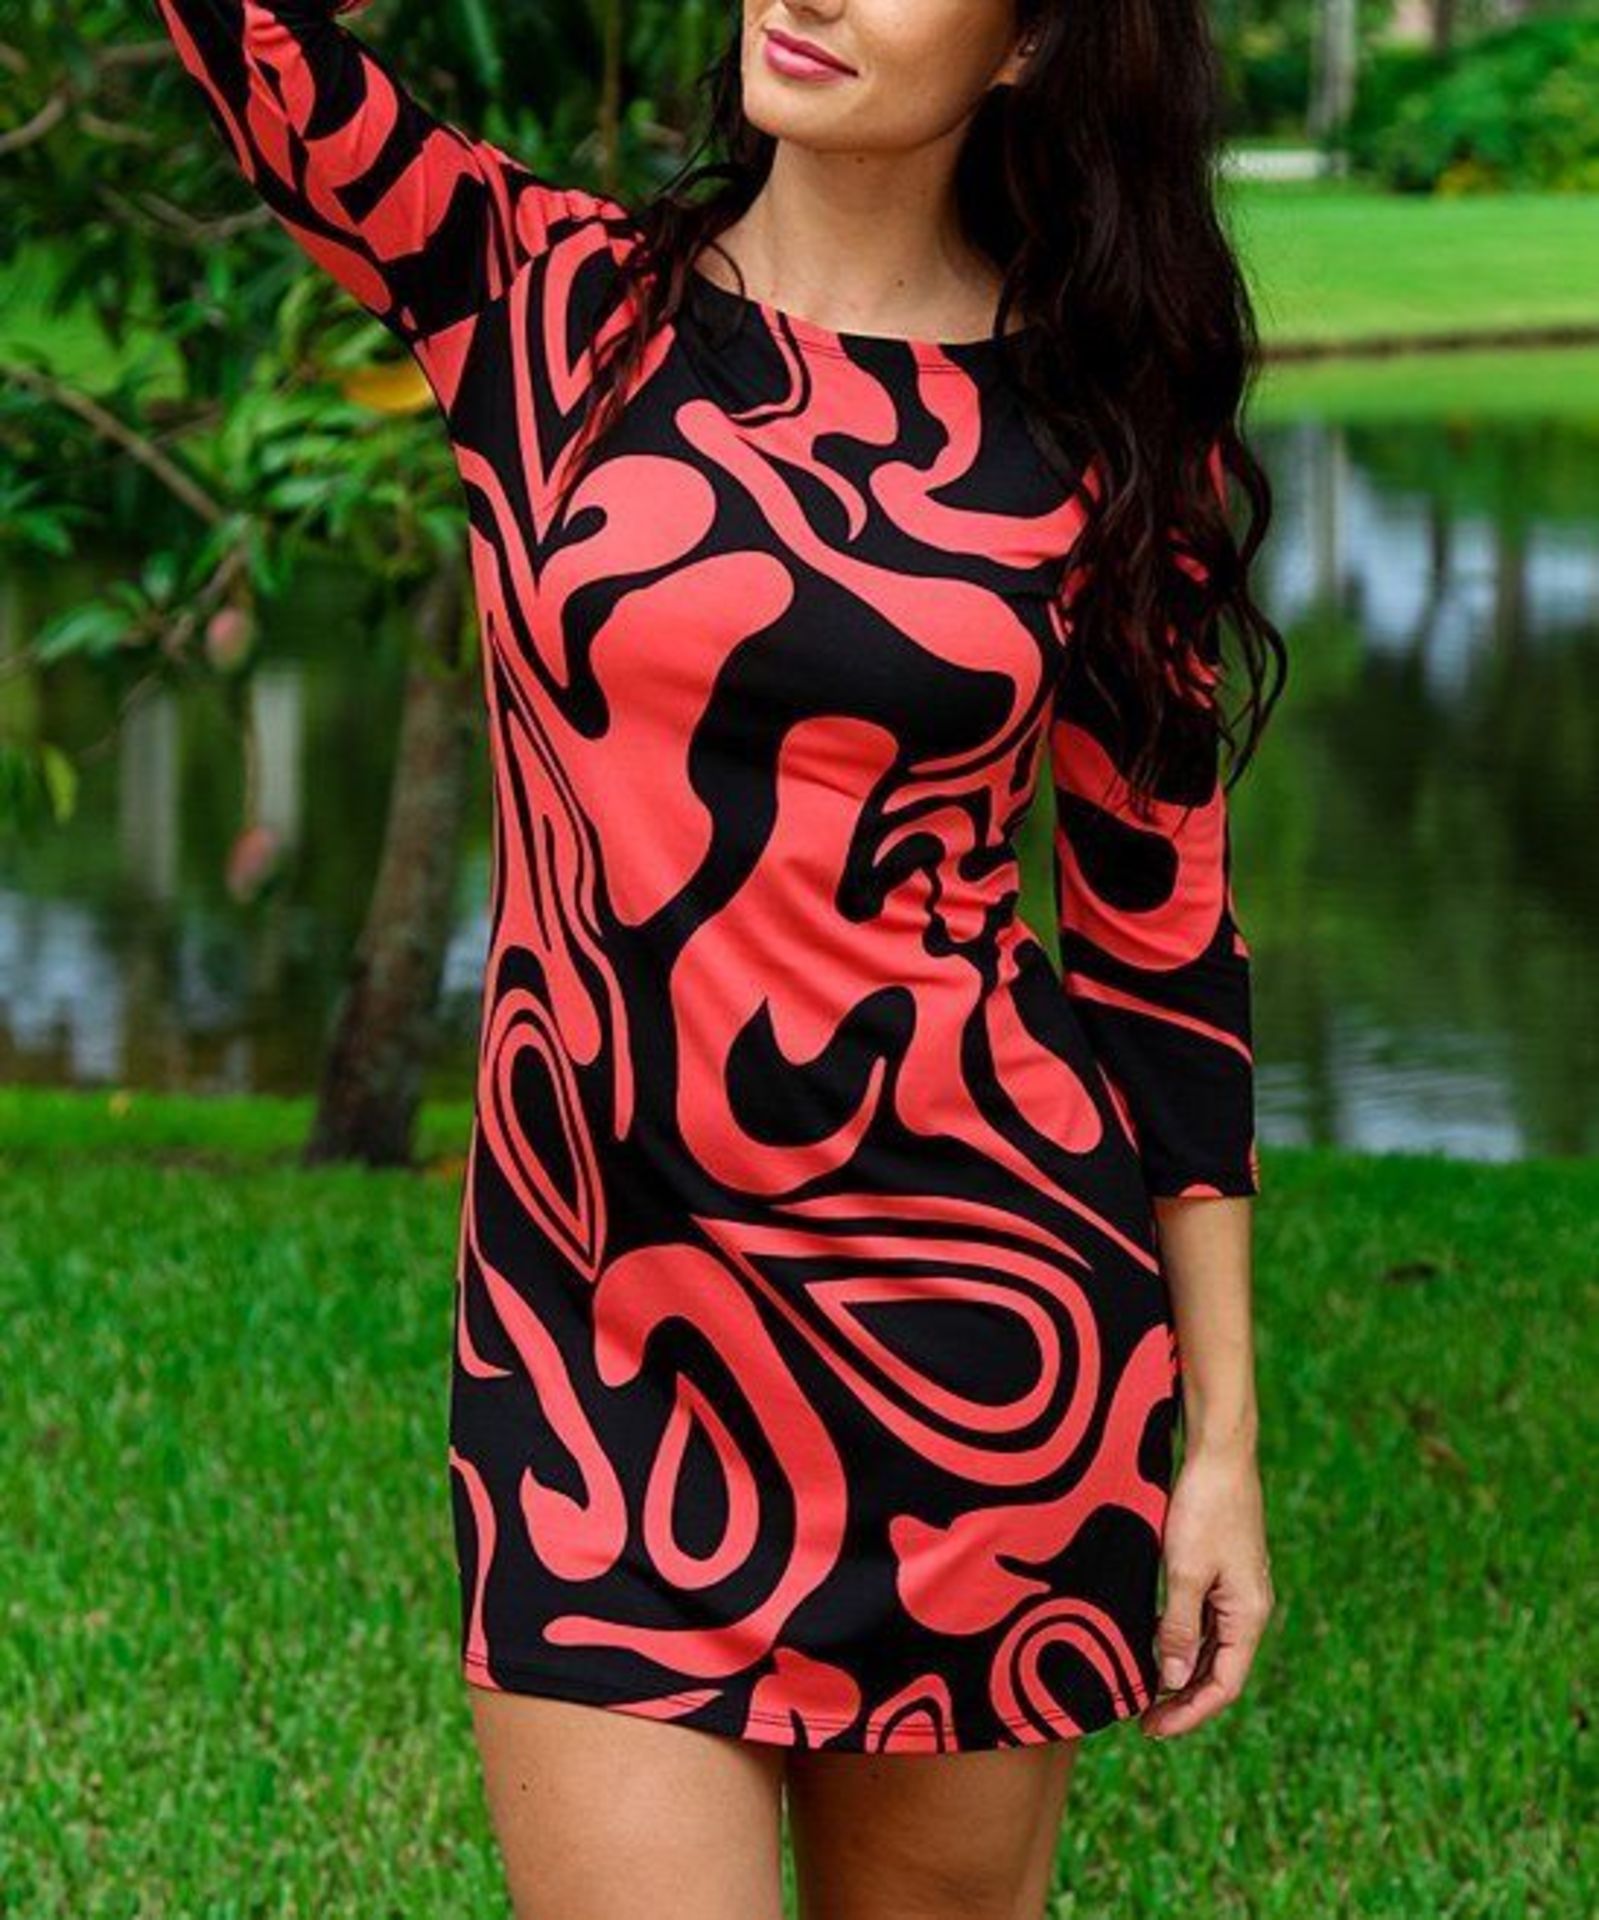 Coral & Black Swirl Three-Quarter Sleeve Shift Dress (Uk Size 8/10:Us Size 4/6) (New with tags) [